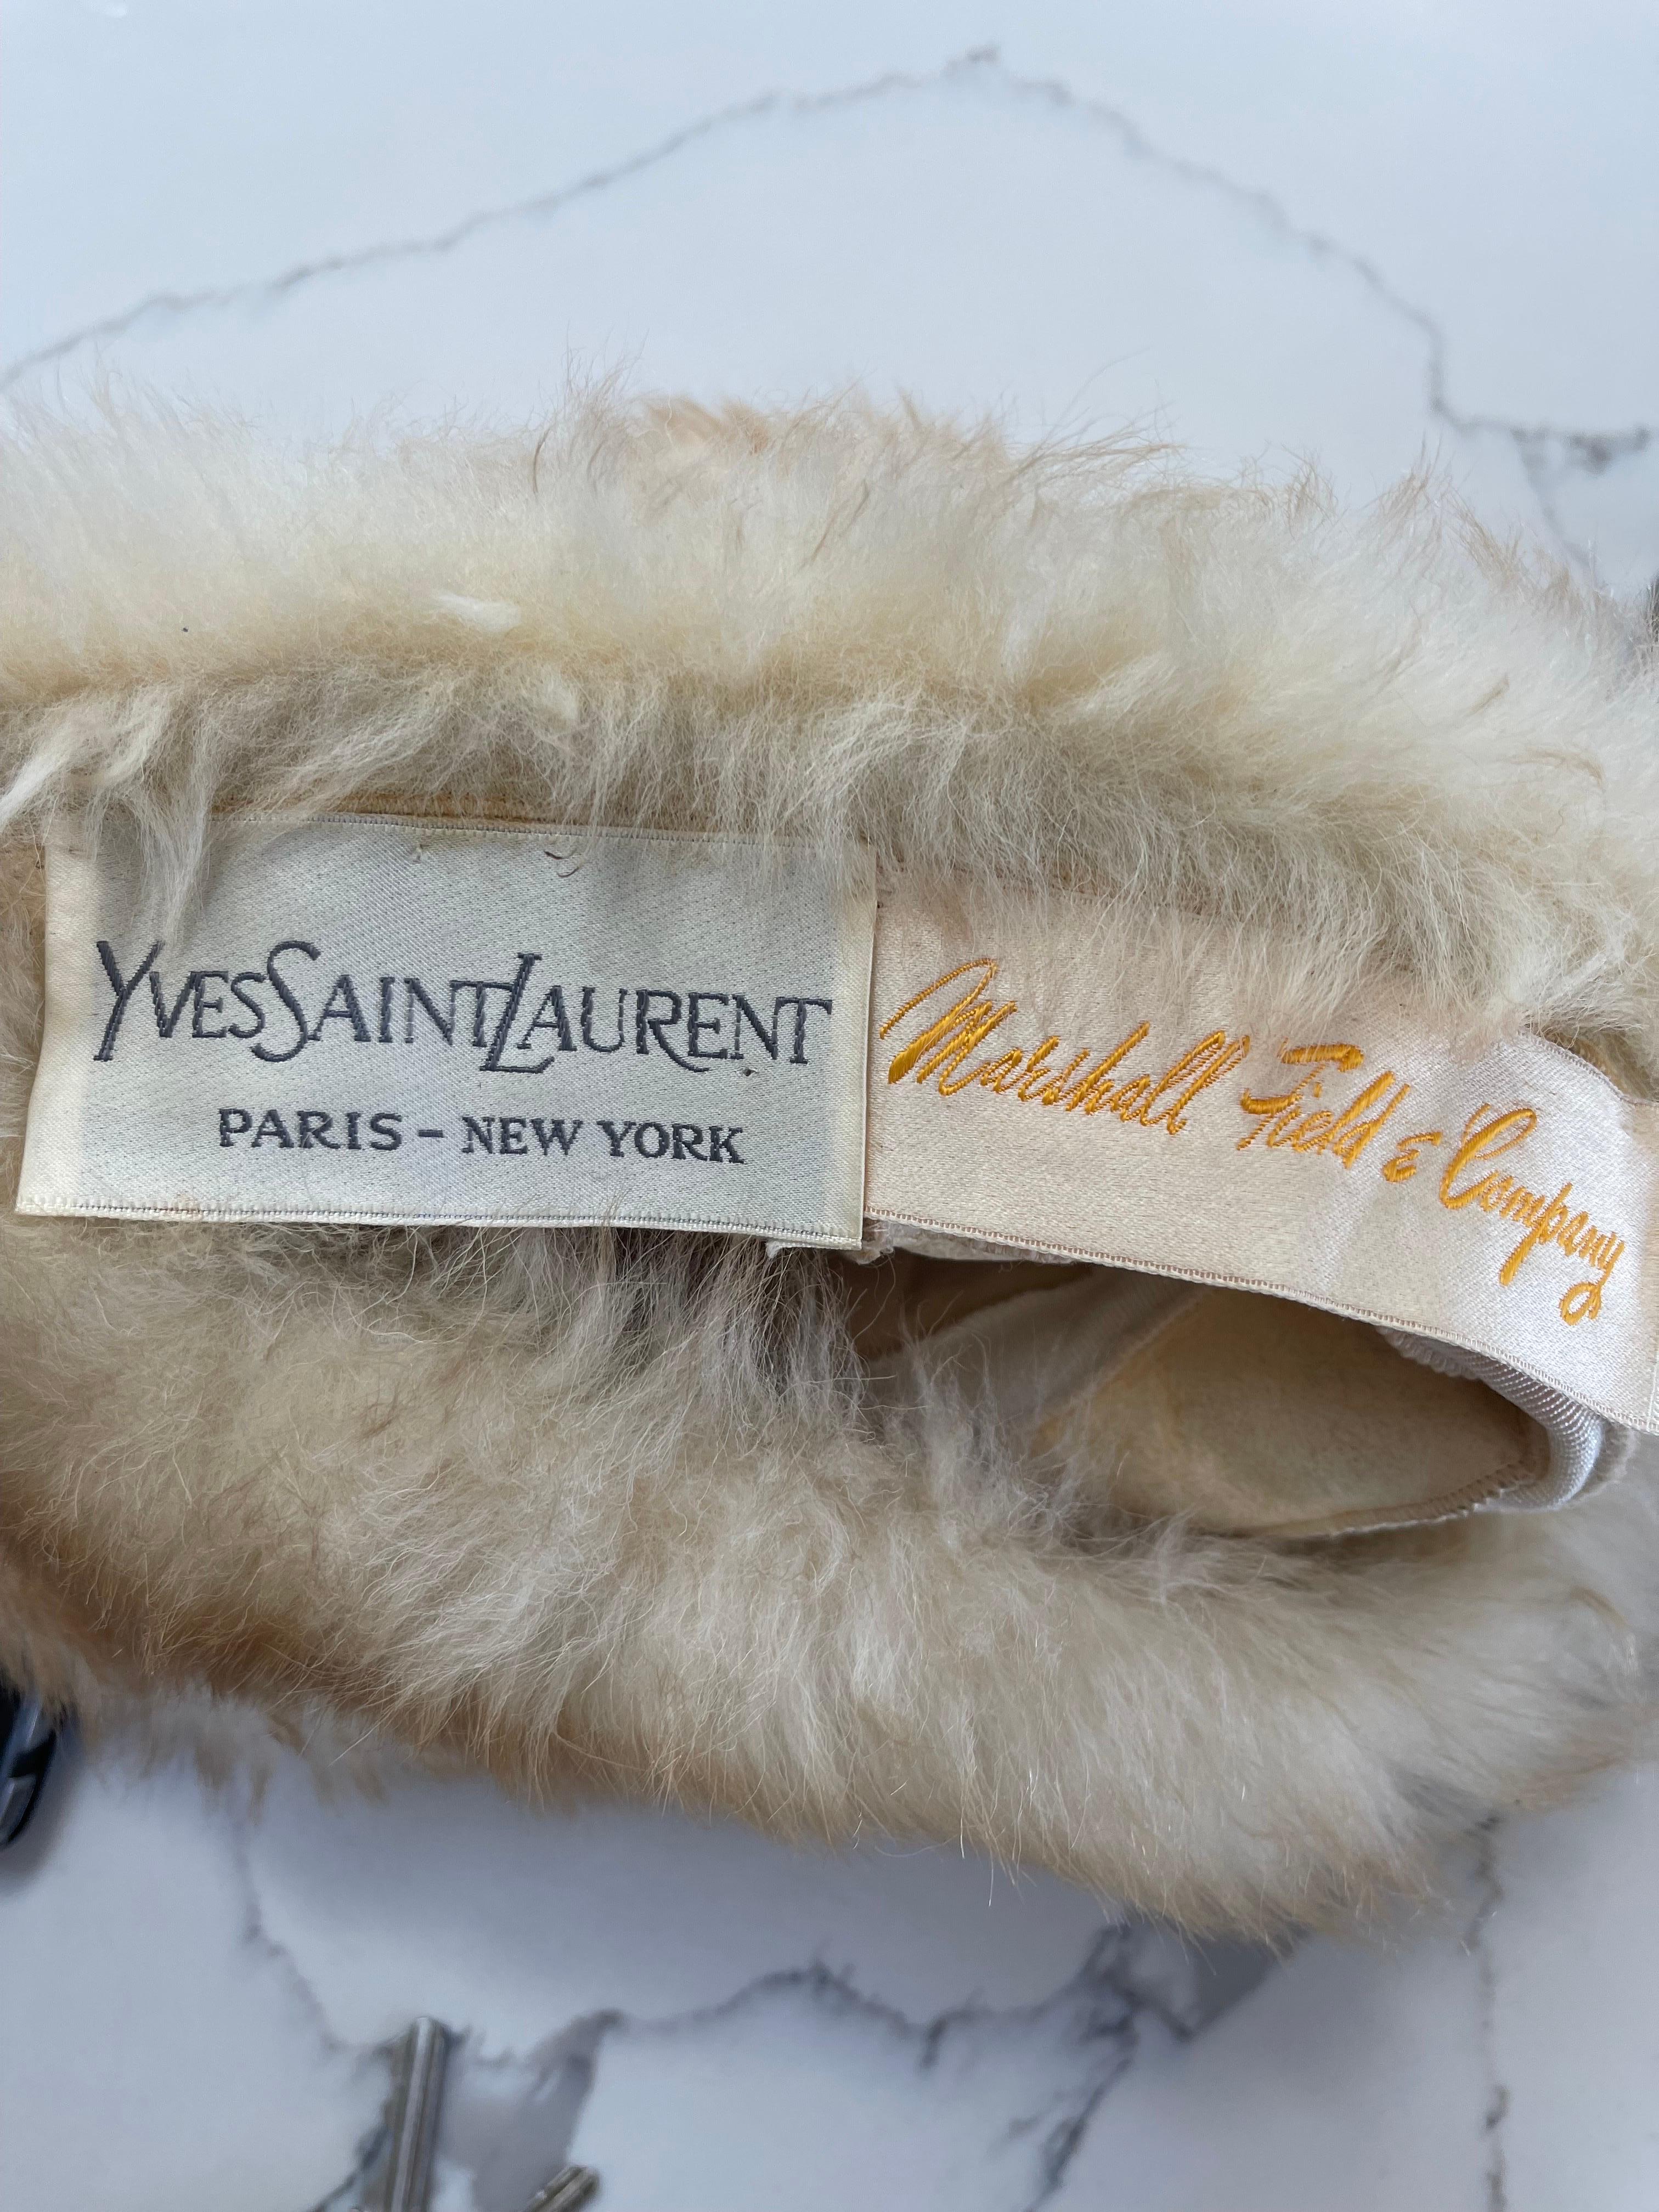 Rare vintage YSL Fall 1976 Russian Collection / Ballet Russes shearling fur hat ! Features a warm honey / light brown color. Soft and warm shearling. Pieces from this collection are extremely are, and are sought after by museums worldwide.
Perfect